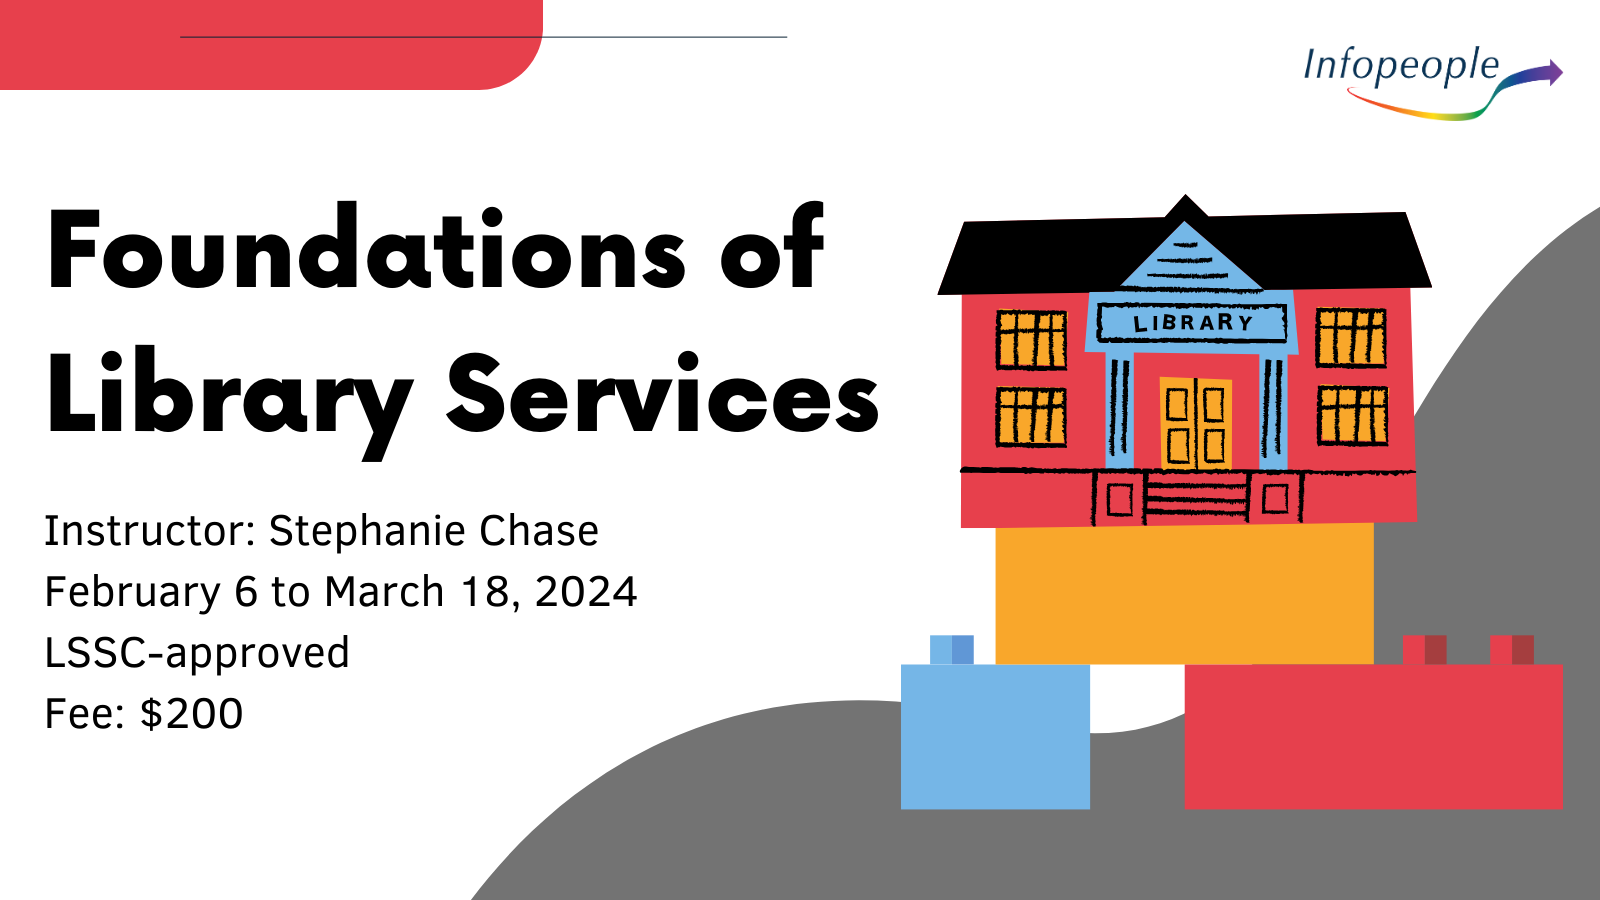 Foundations of Library Services - an Infopeople course. February 6 to March 18, 2024. LSSC-approved. Instructor: Stephanie Chase. Fee: $200. A set of Lego building blocks with a library building on top.